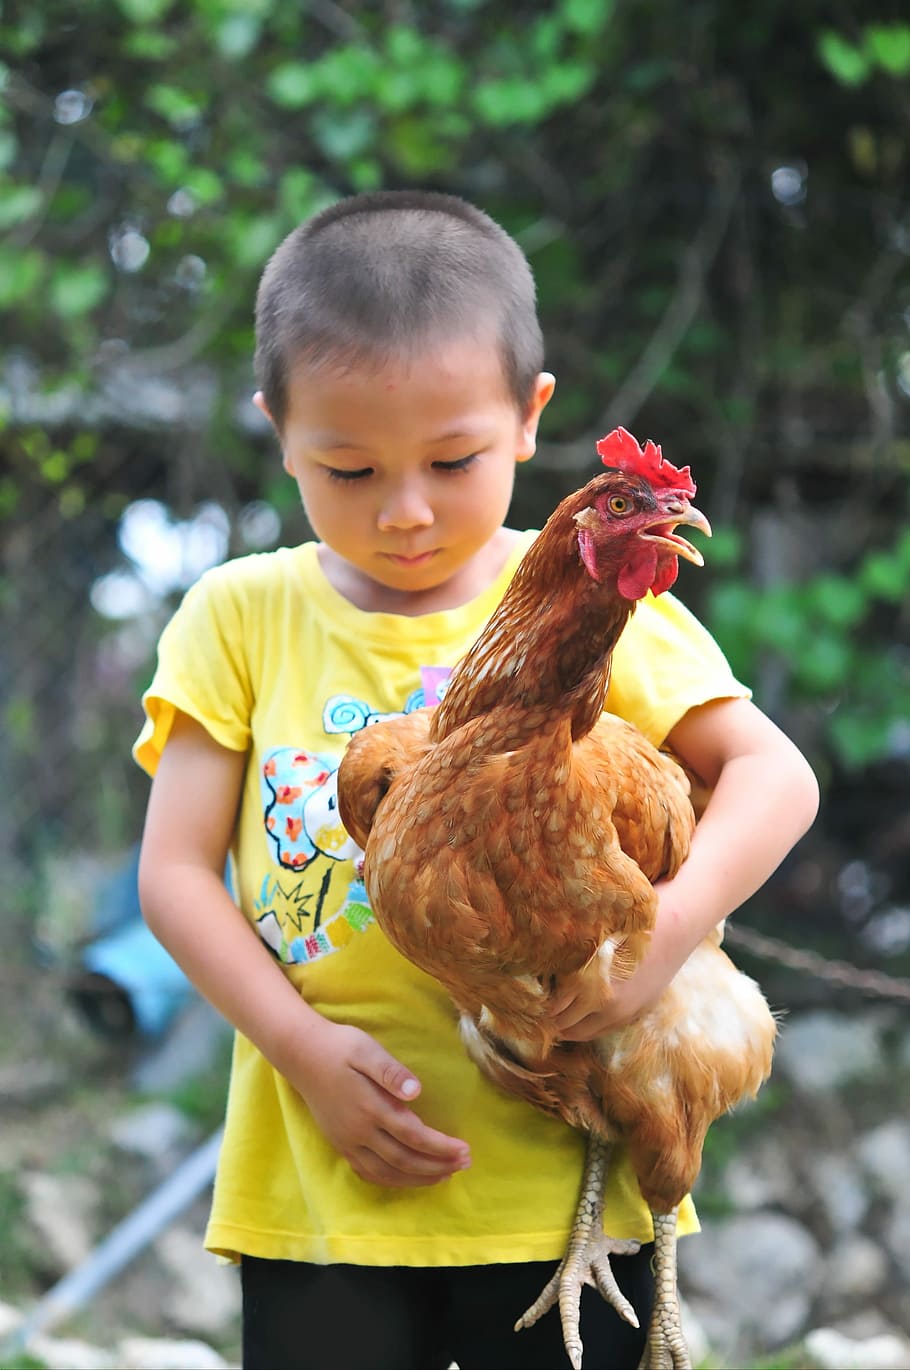 chicken, bantam, cute, carrying, adorable, people, boy, child